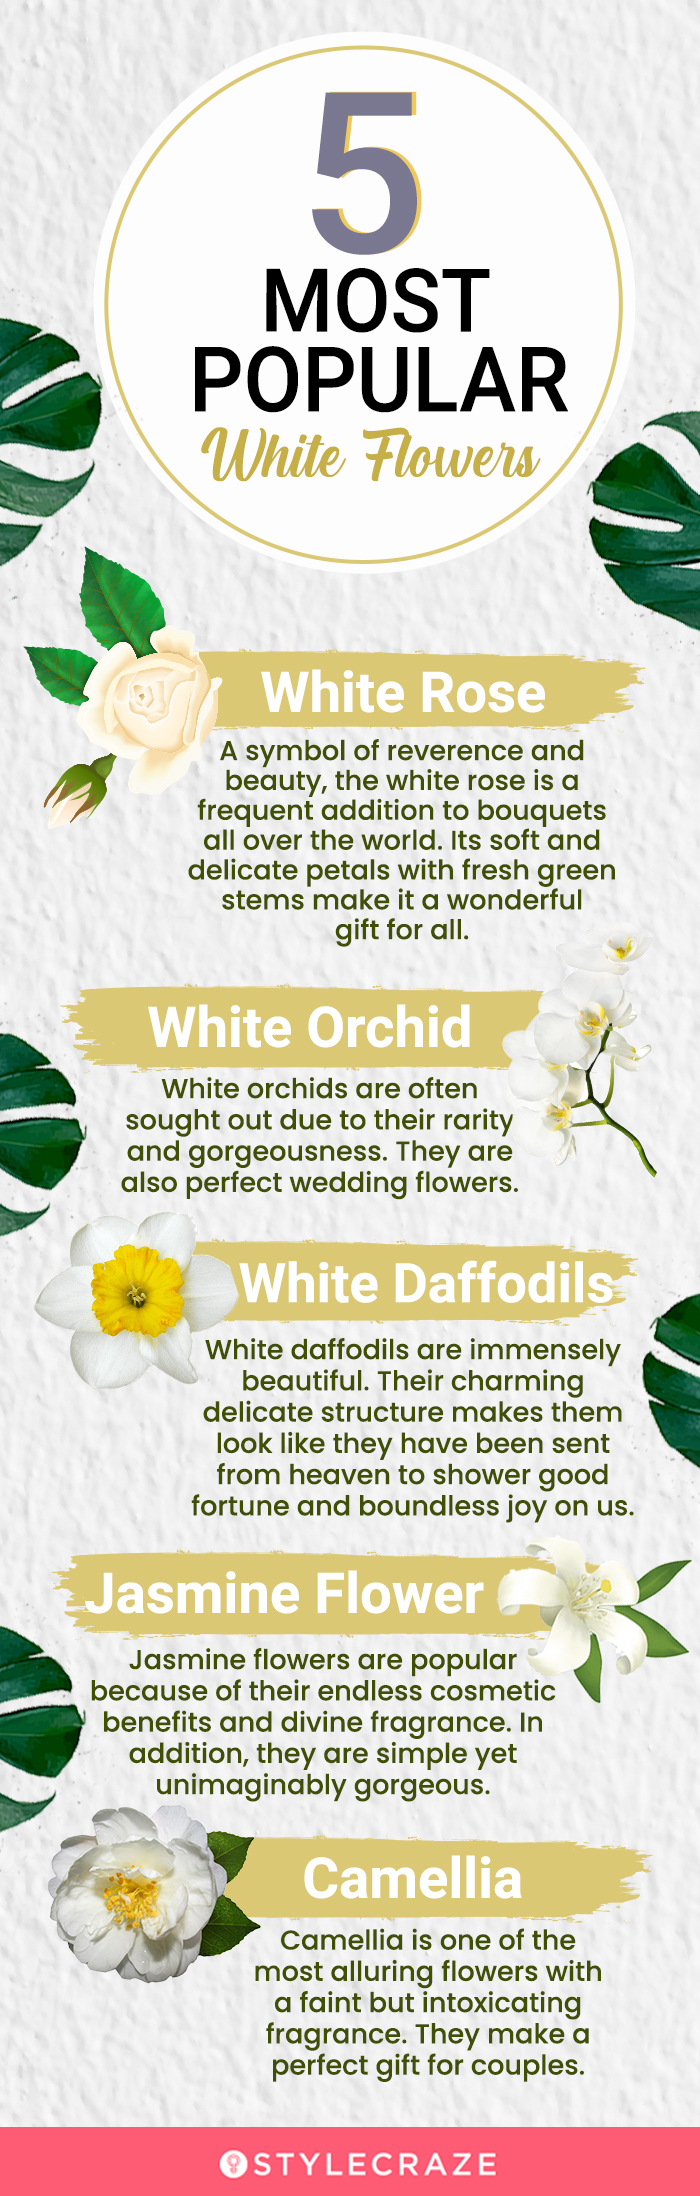 5 most popular white flowers (infographic)